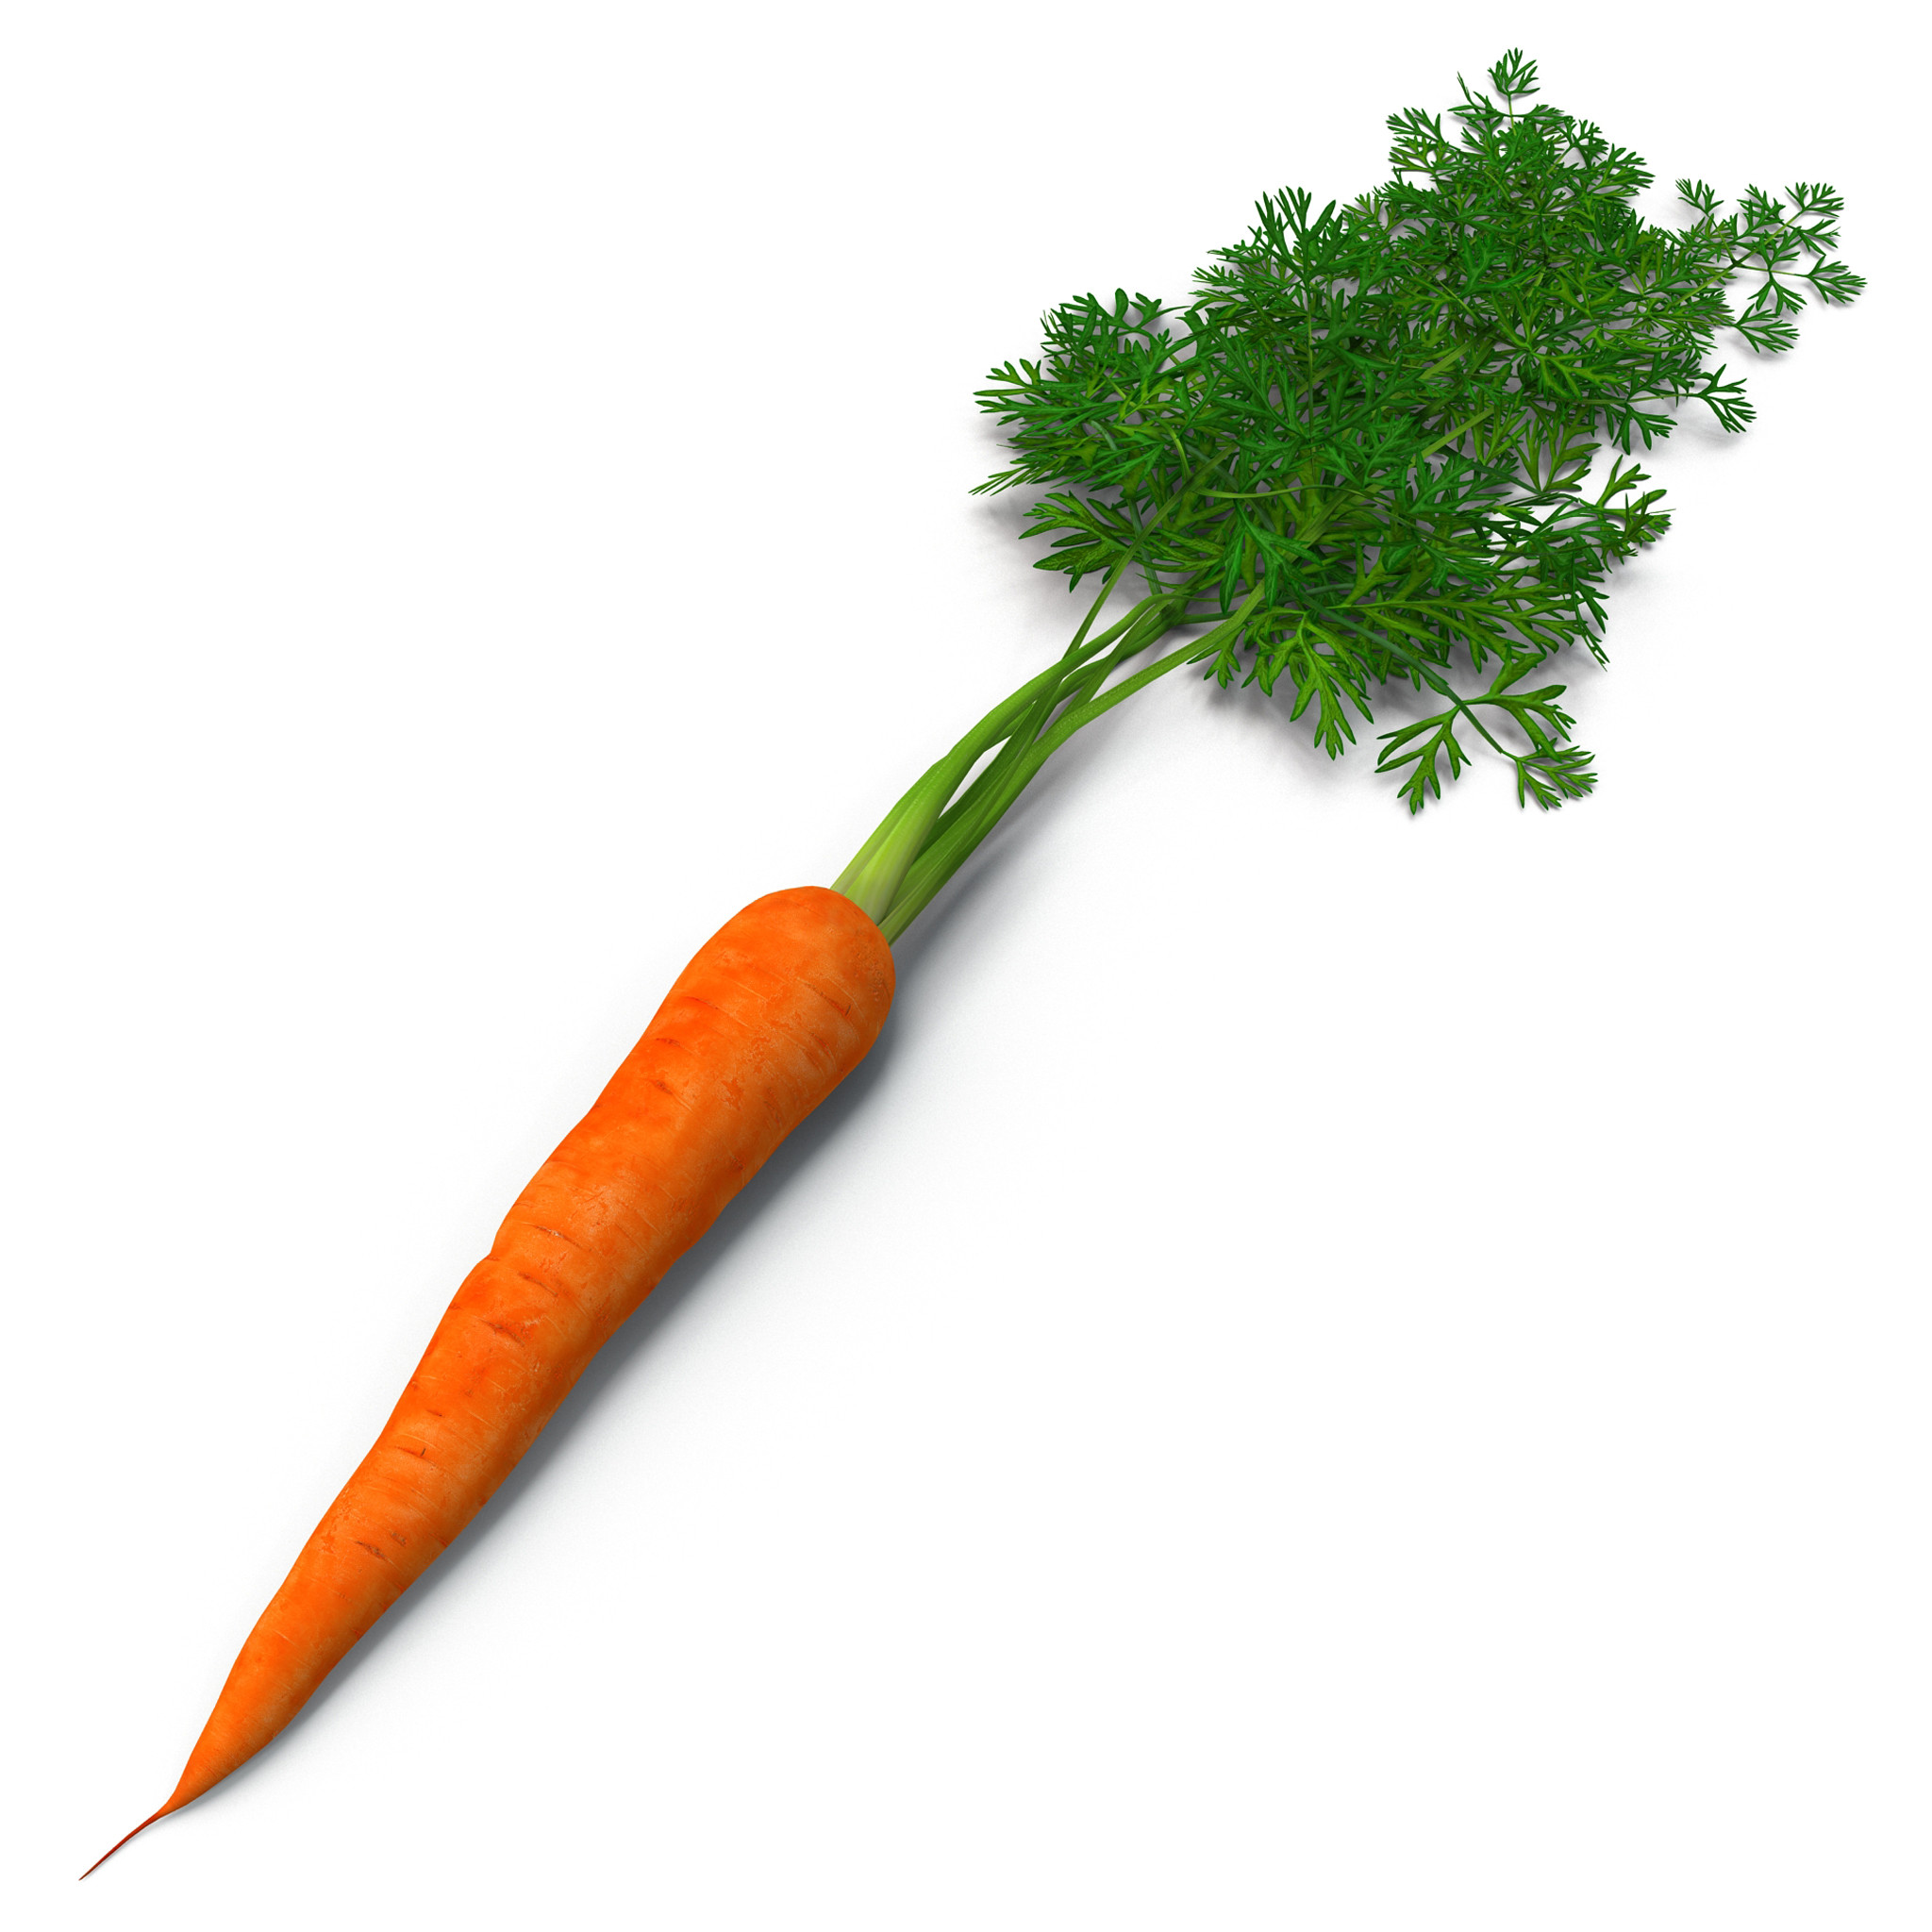 Carrot Fruit Vegetable Pictures